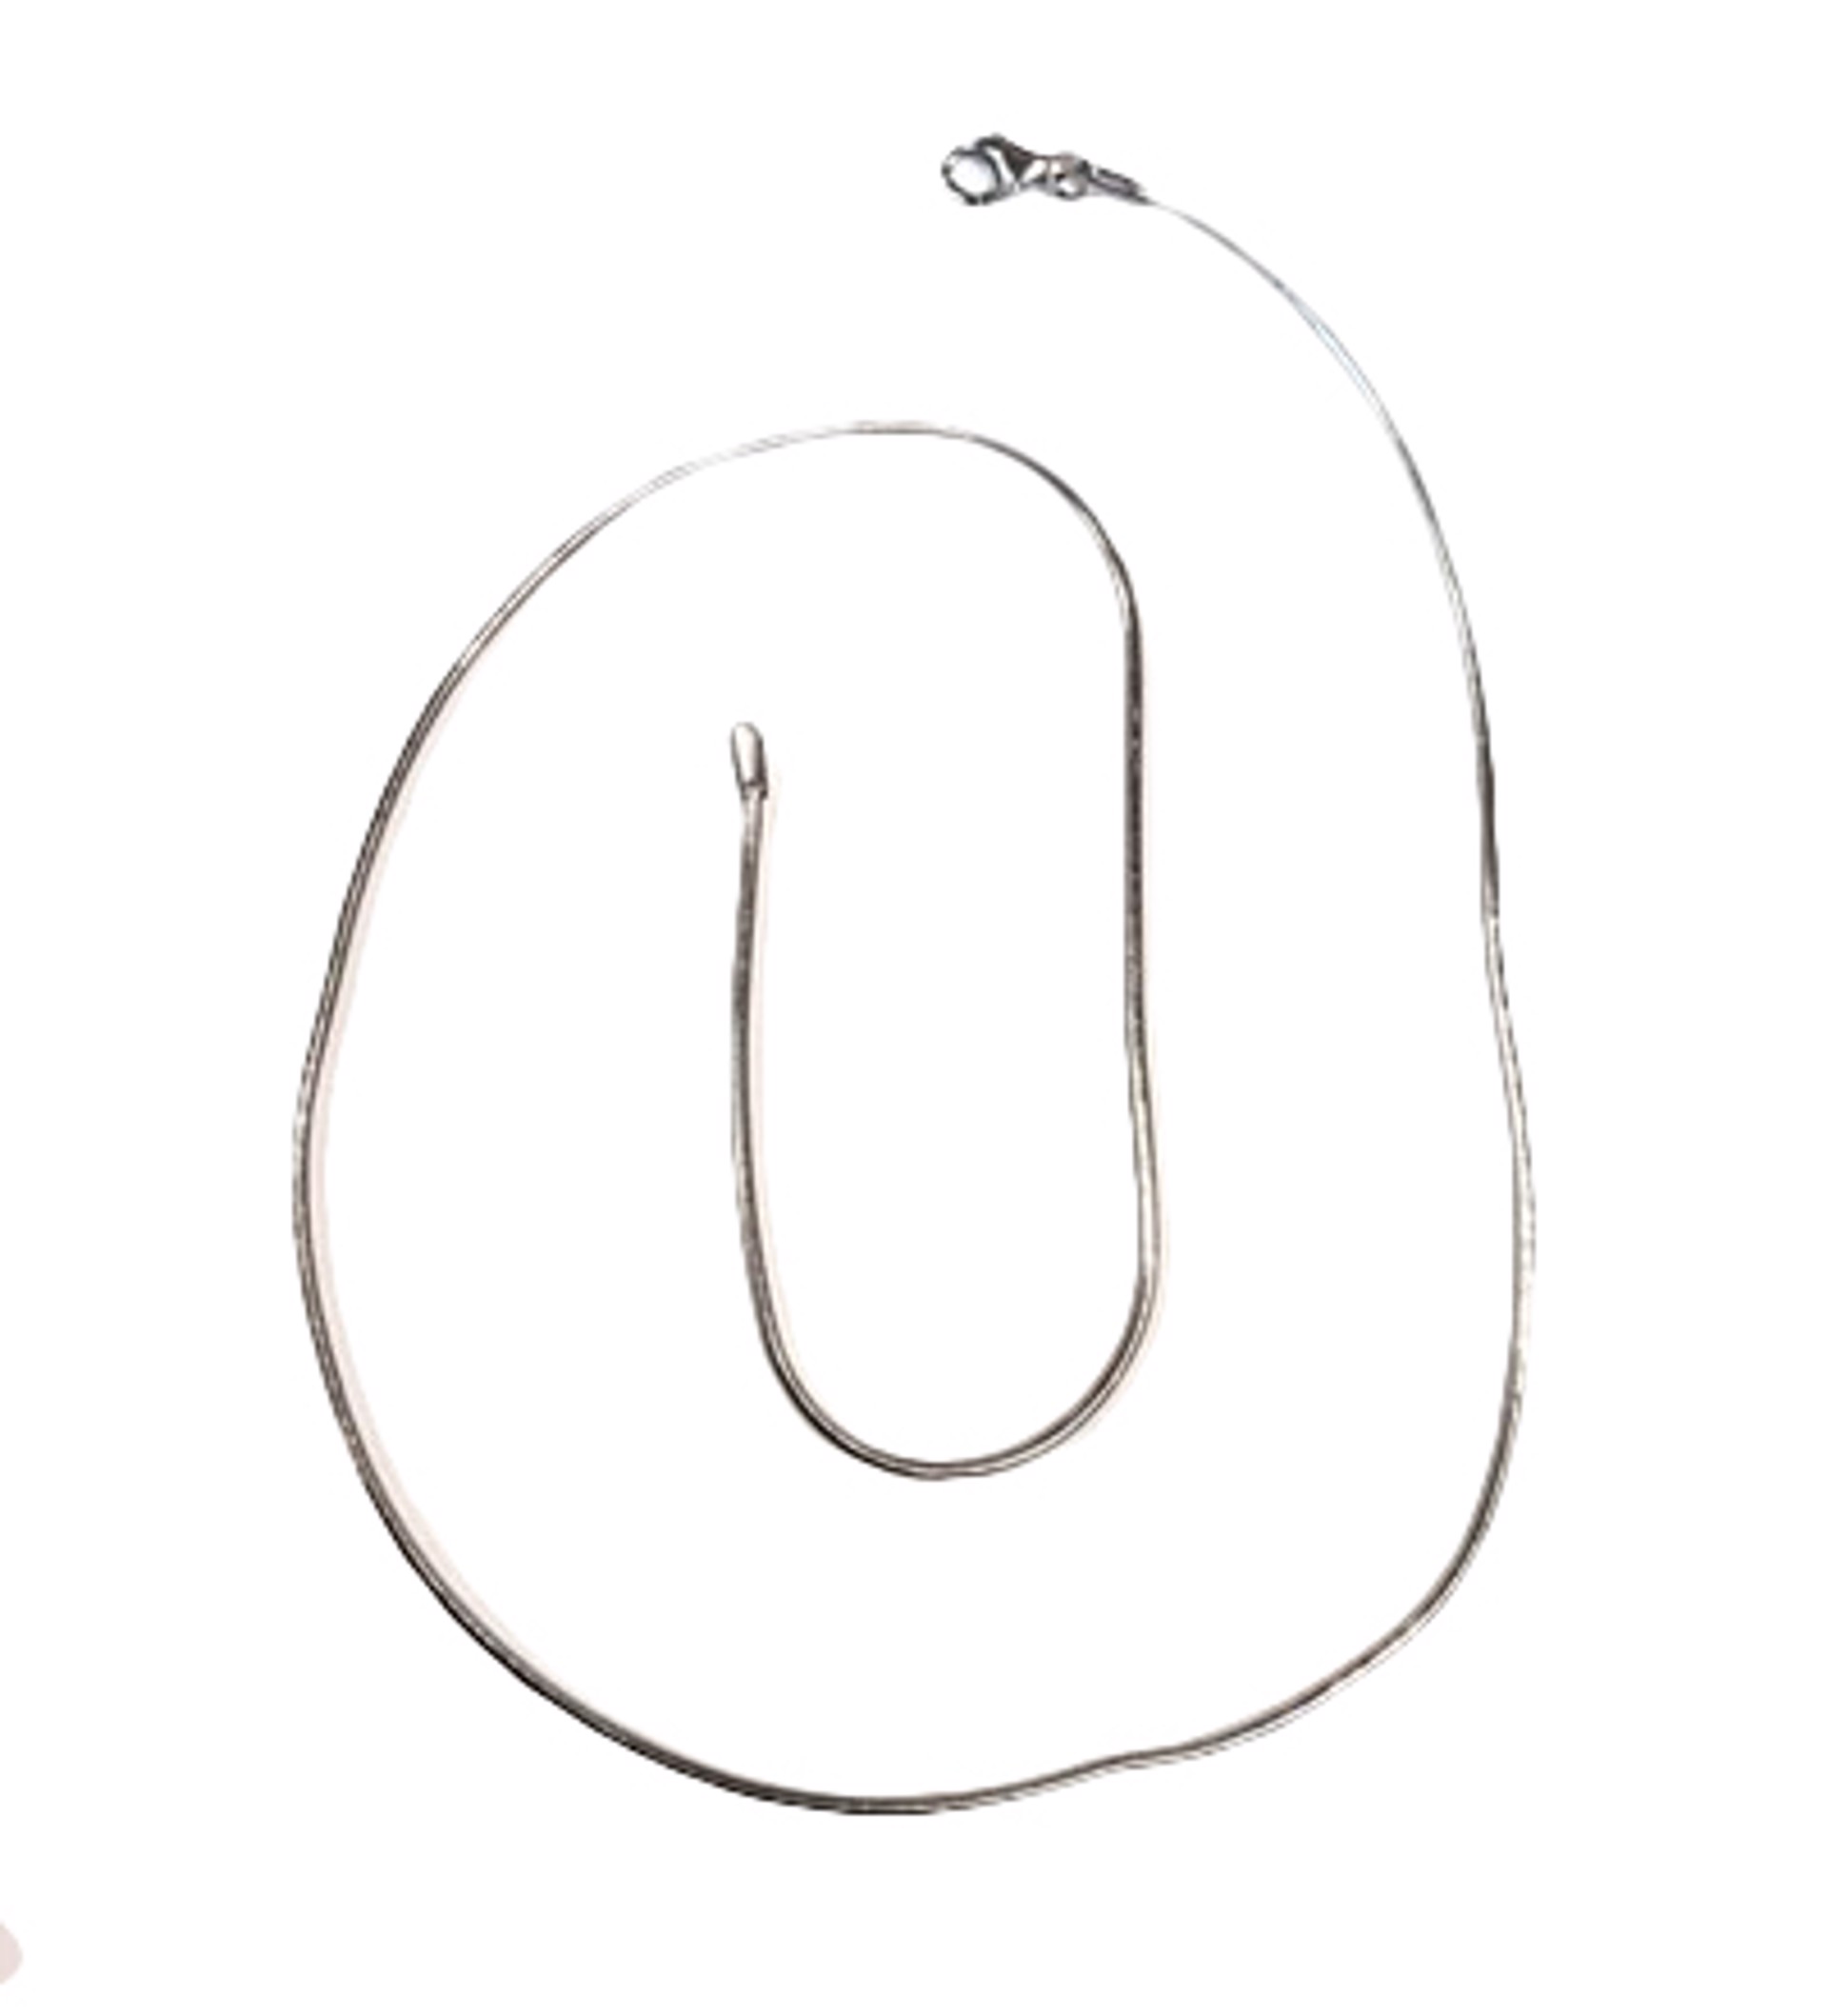 Necklace - 18" Sterling Silver Chain KNG 12 by Joryel Vera